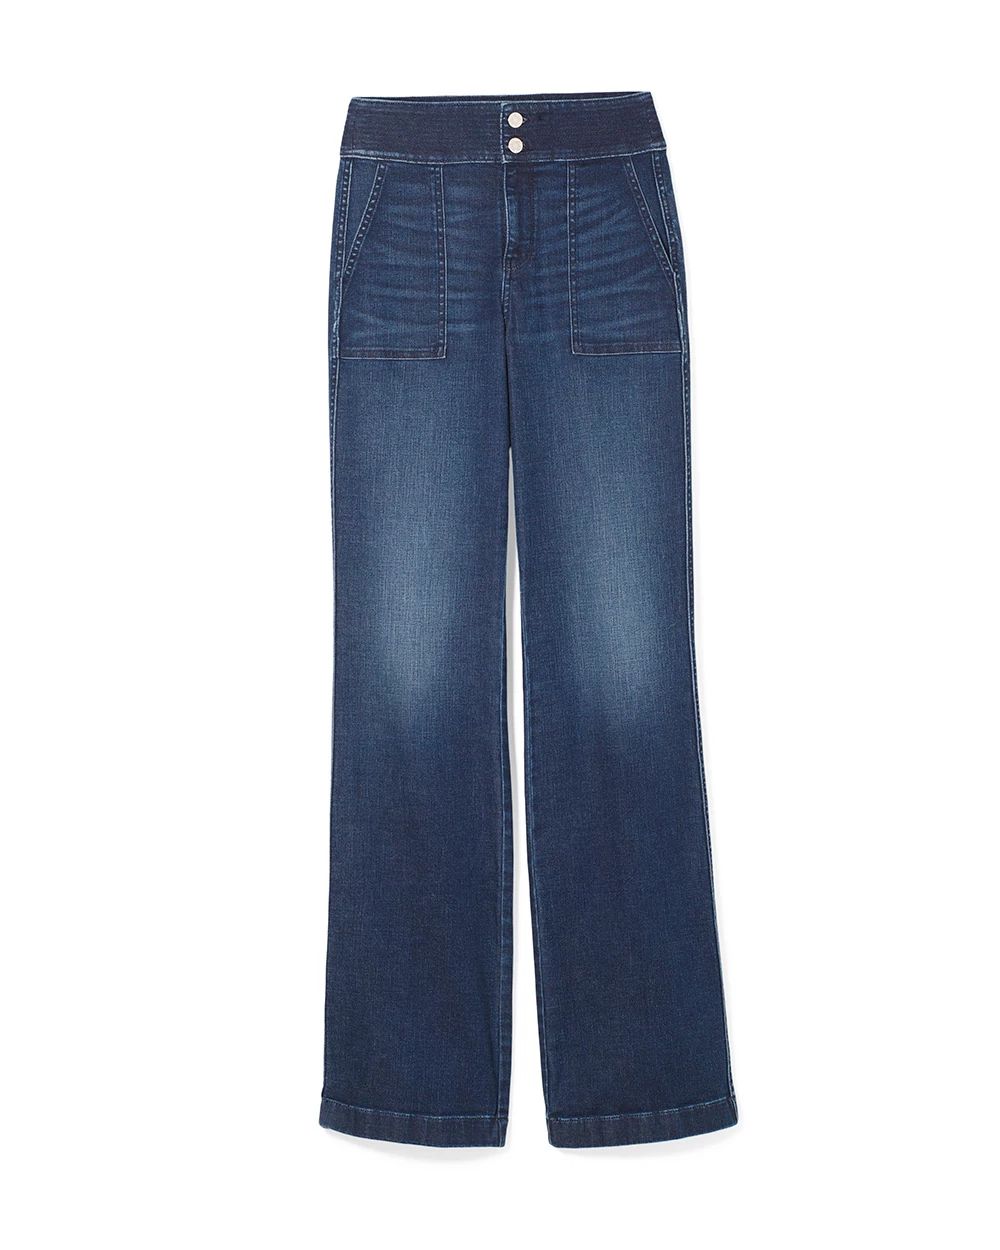 Extra High-Rise Everyday Soft Denim™ Trupunto Trouser Jeans click to view larger image.